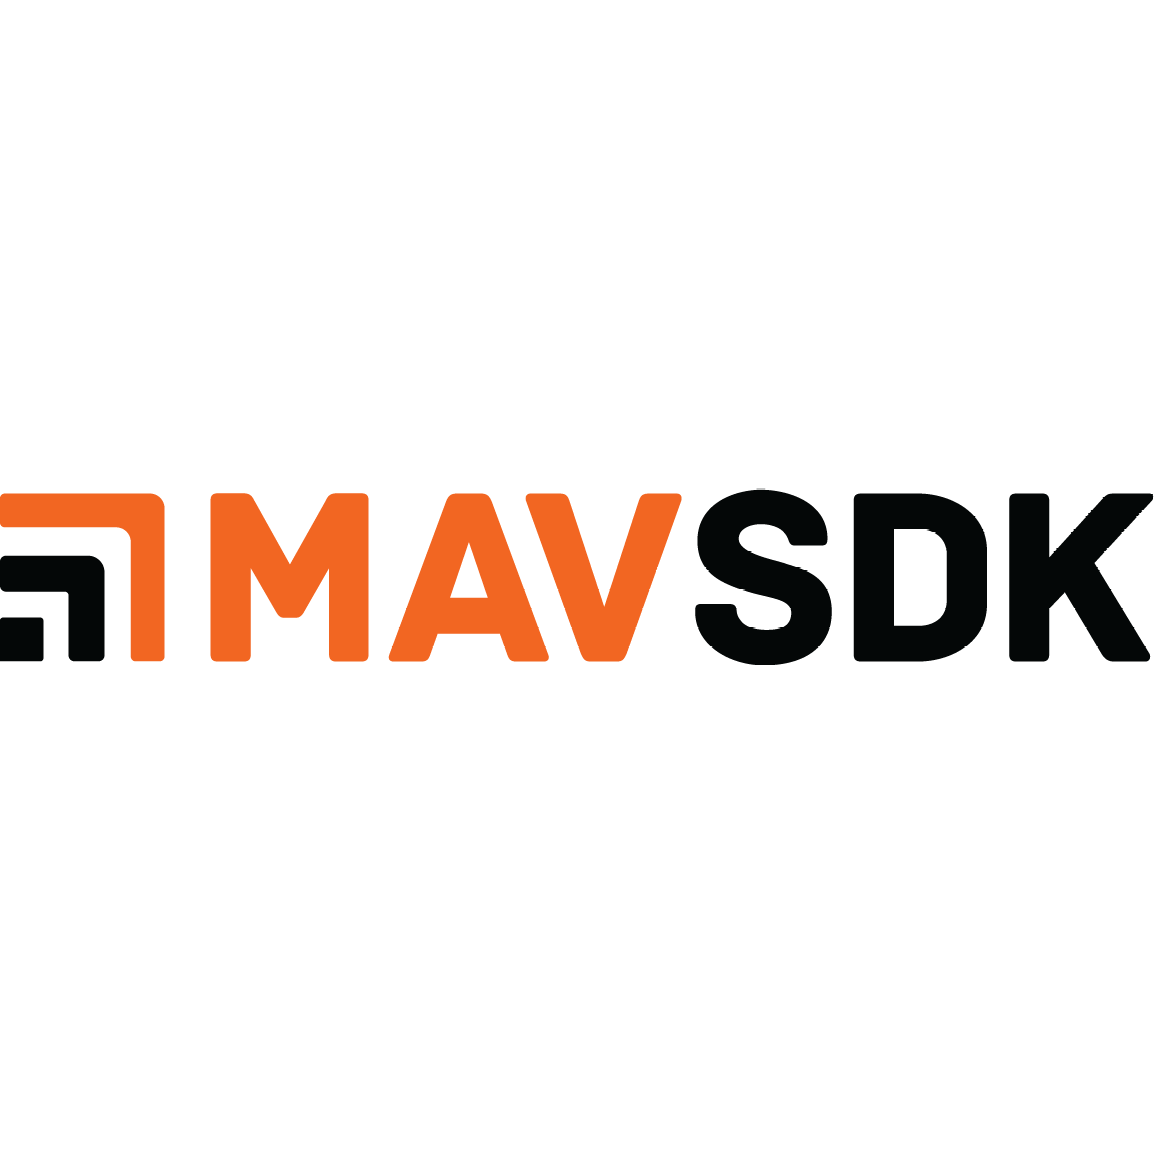 Automate your Drone using VOXL and MAVSDK